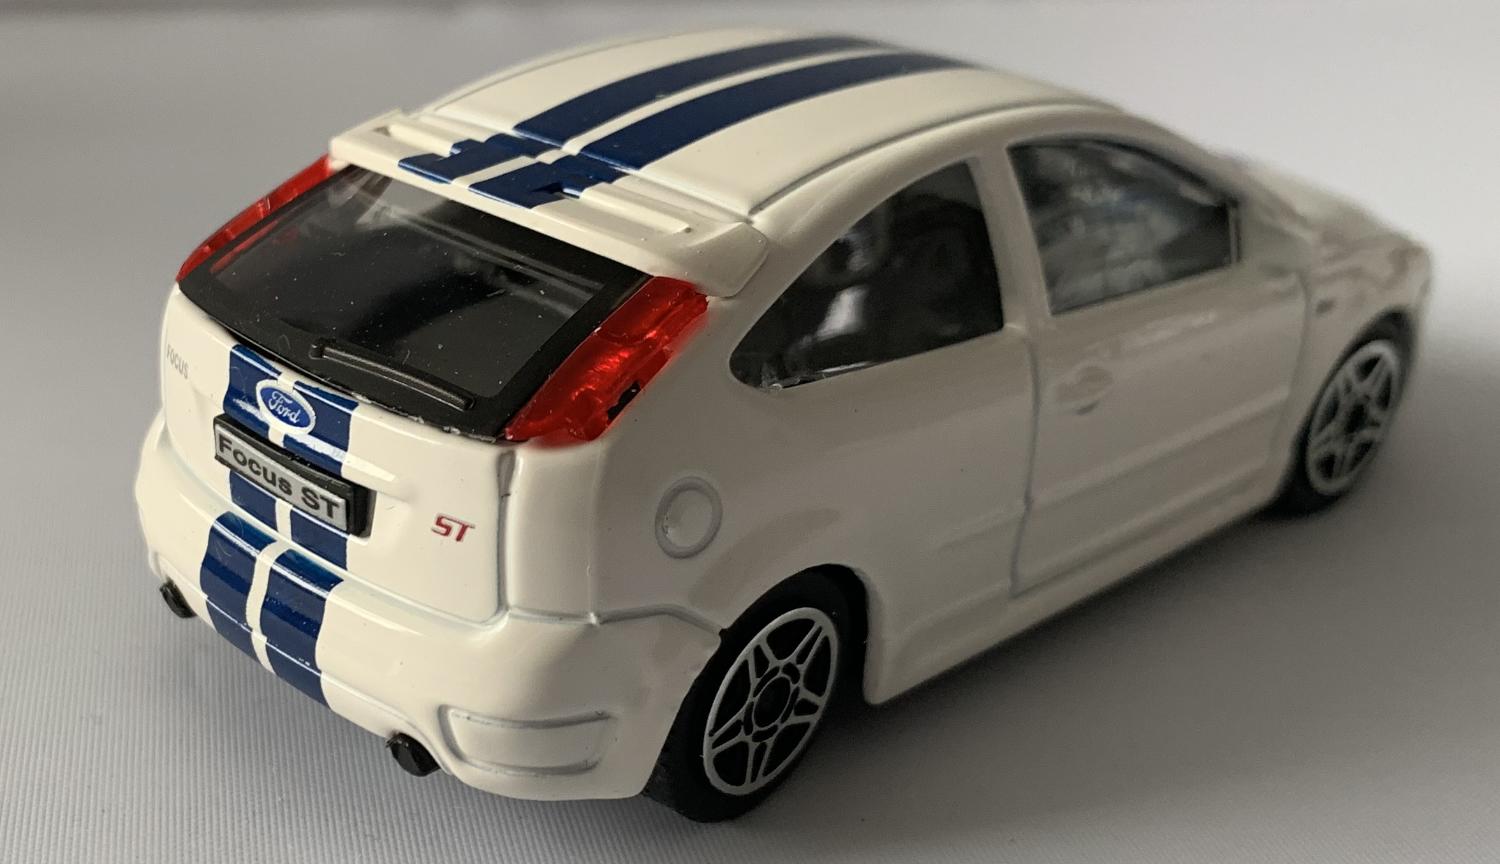 Ford Focus ST in white 1:43 scale diecast model from Bburago, streetfire